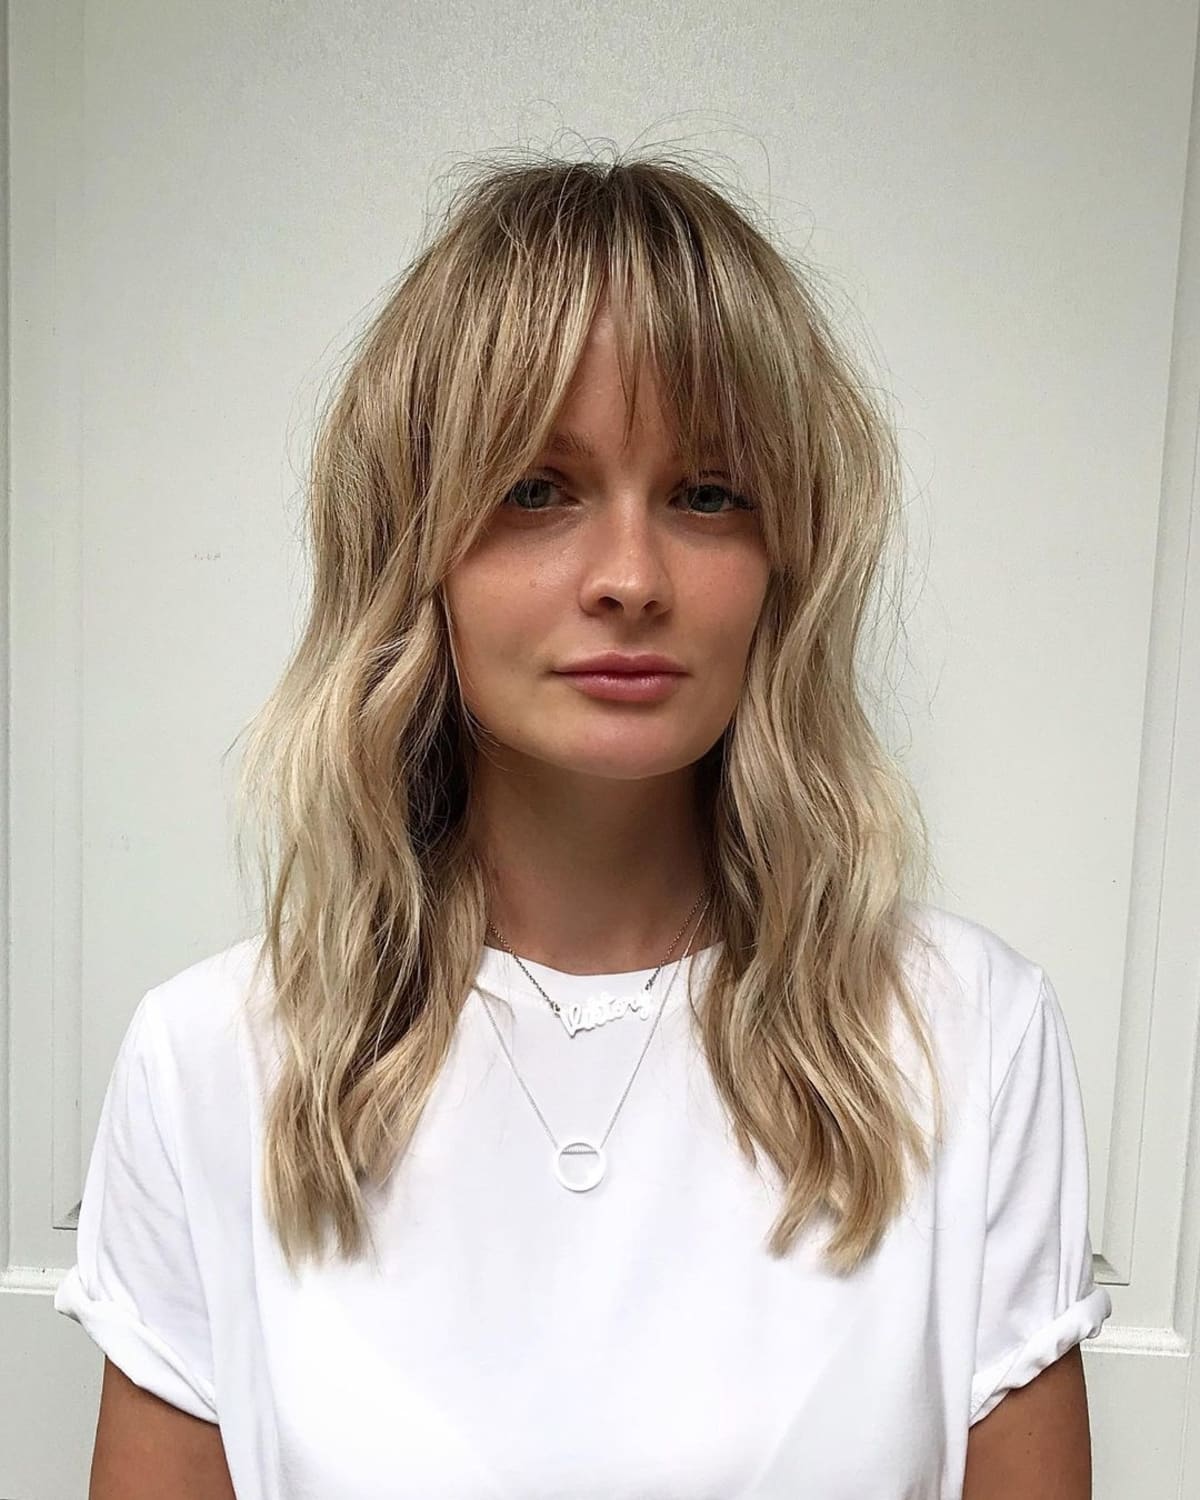 21 Trendiest Ways to Wear Long Curtain Bangs, According to Stylists